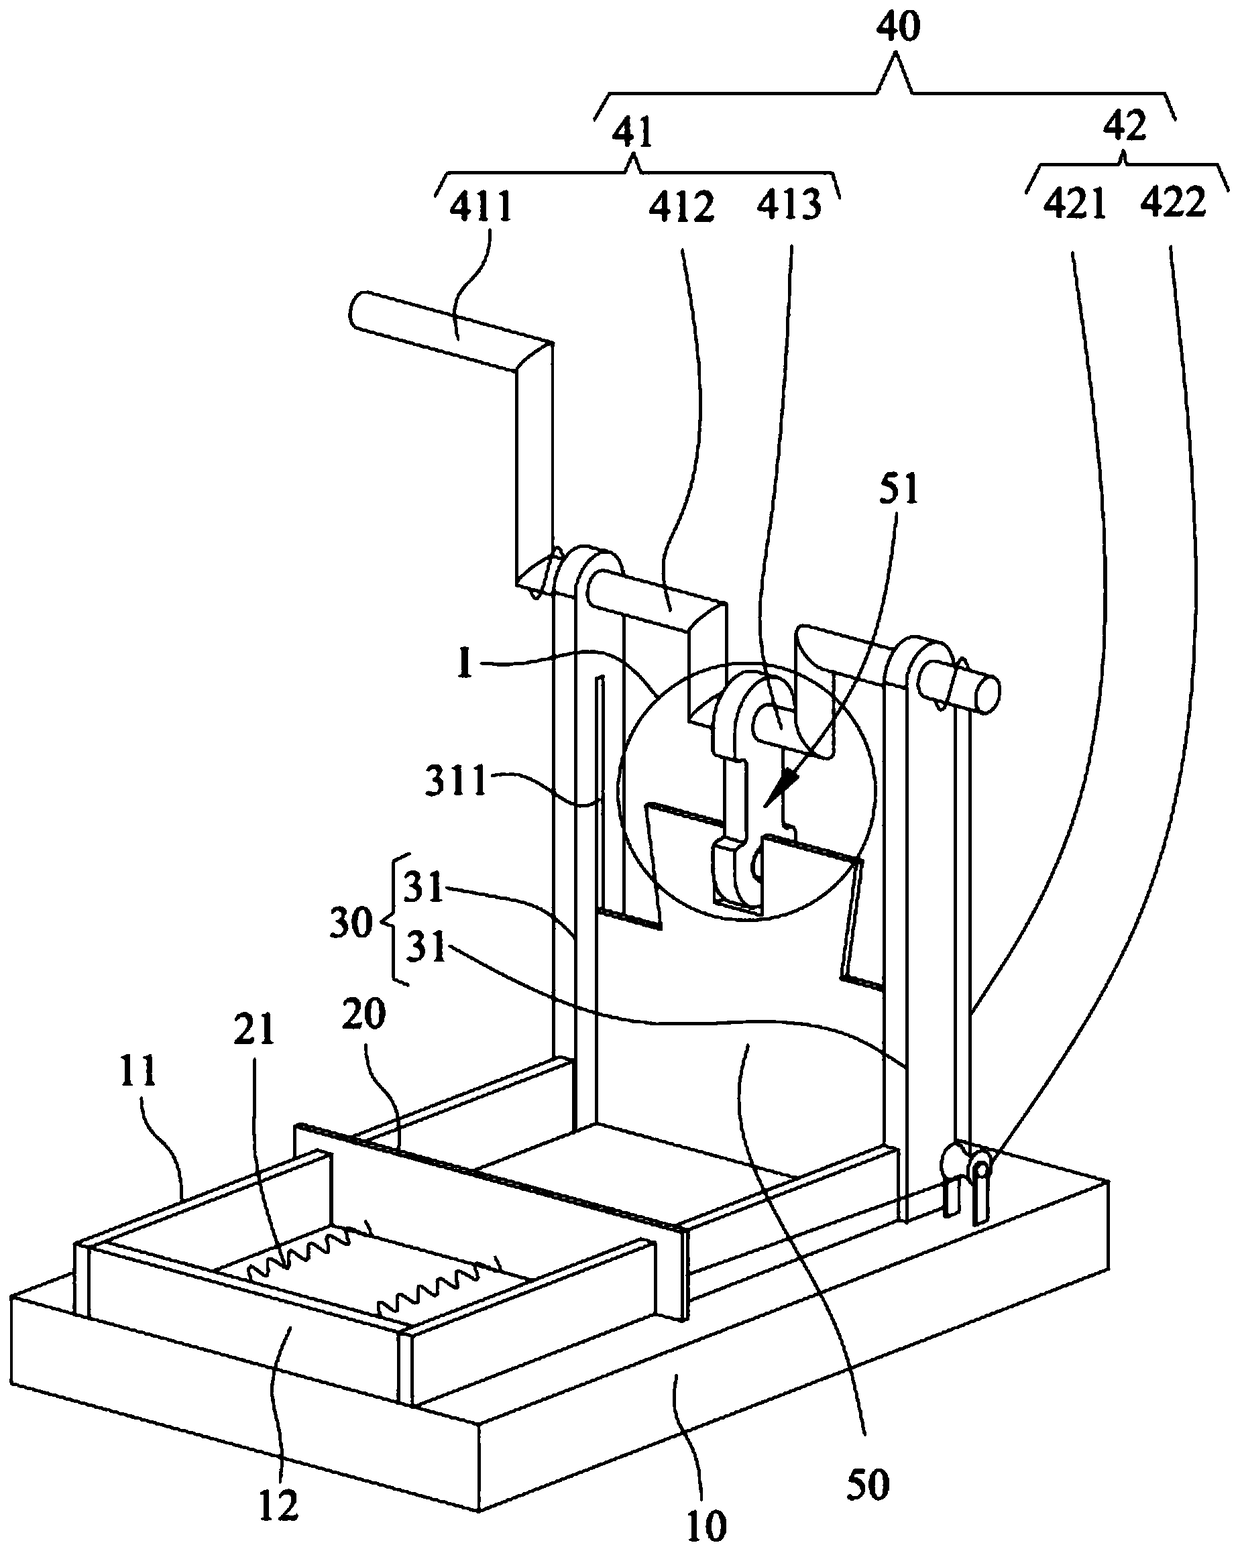 Manual vegetable cutting device